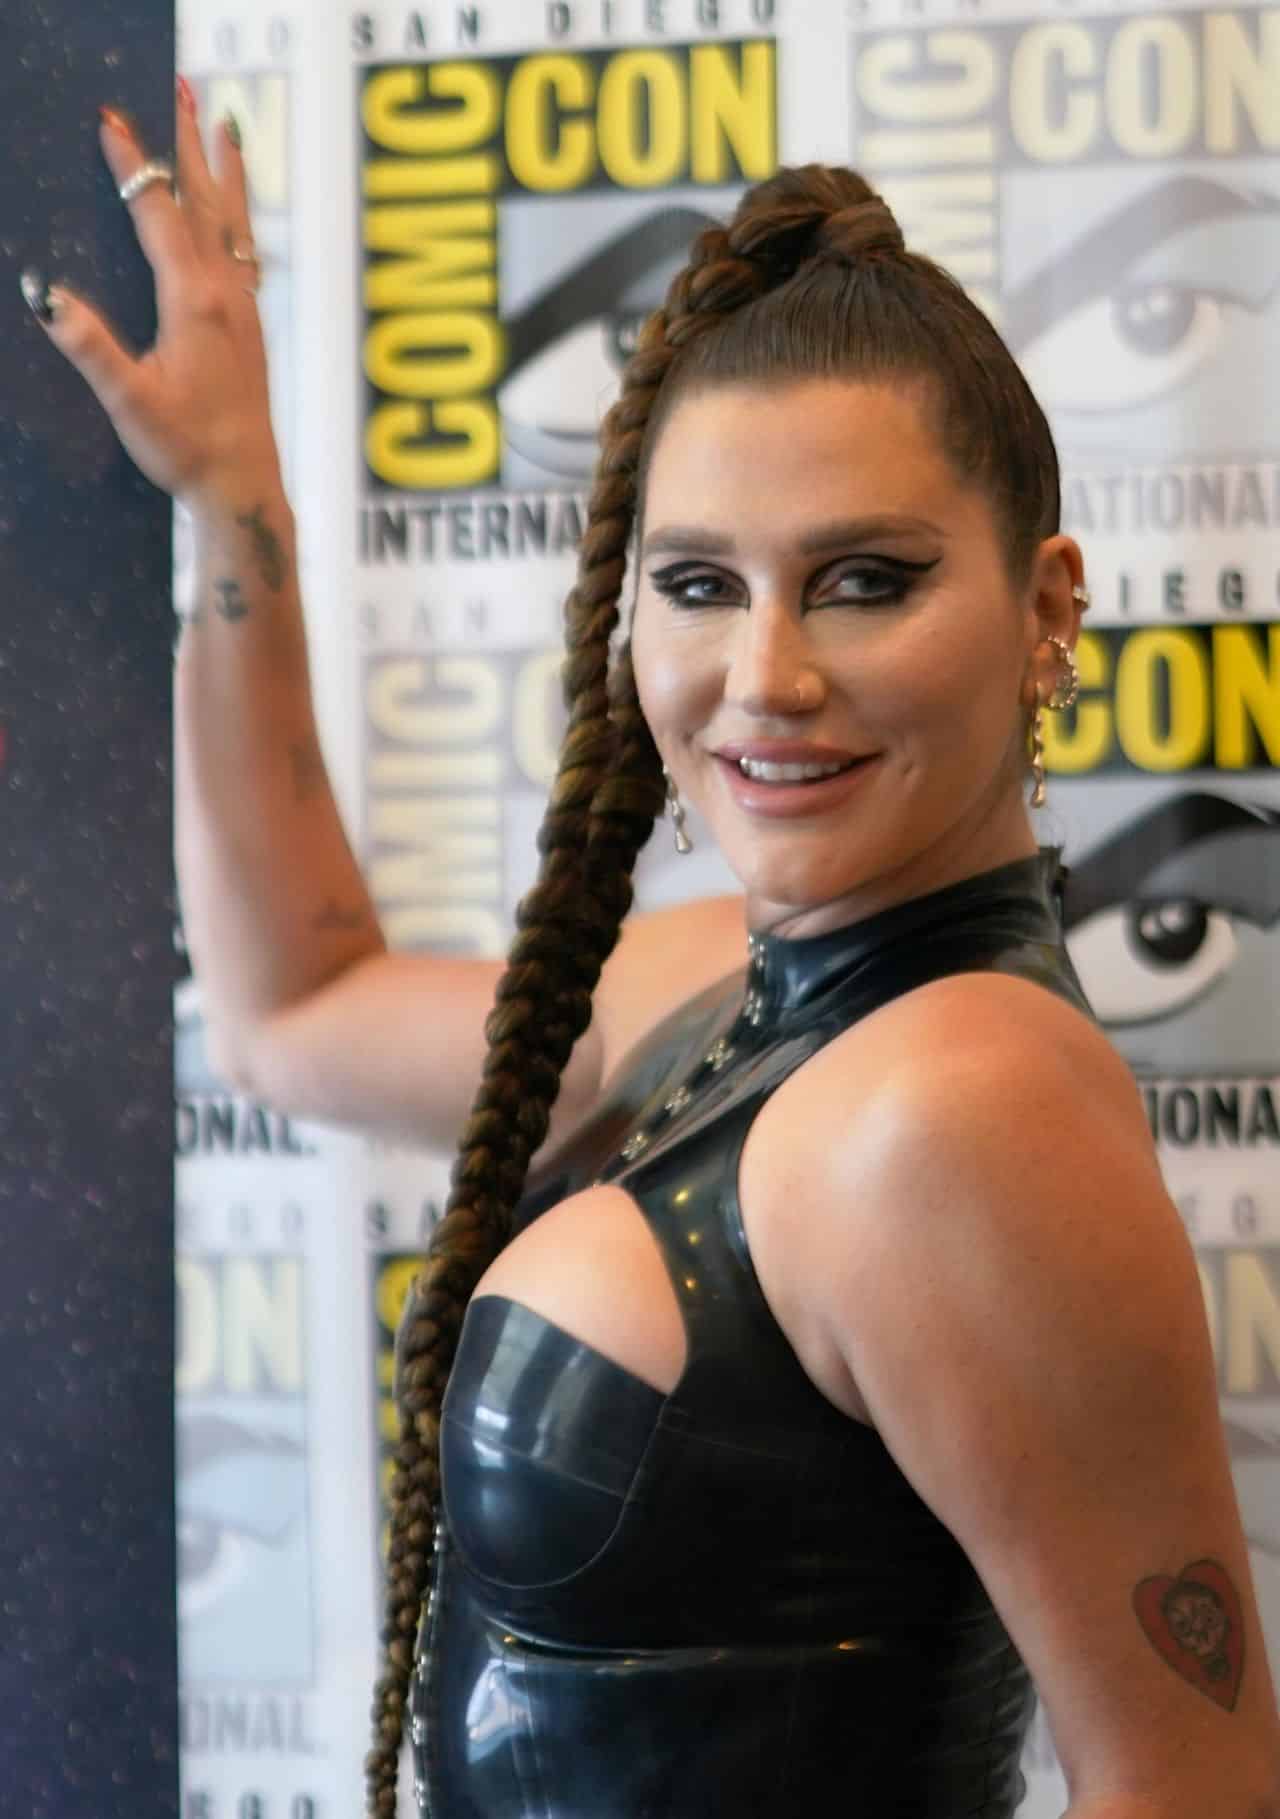 Kesha in Black Outfit at Discovery+ "Conjuring Kesha" Press Line at SDCC